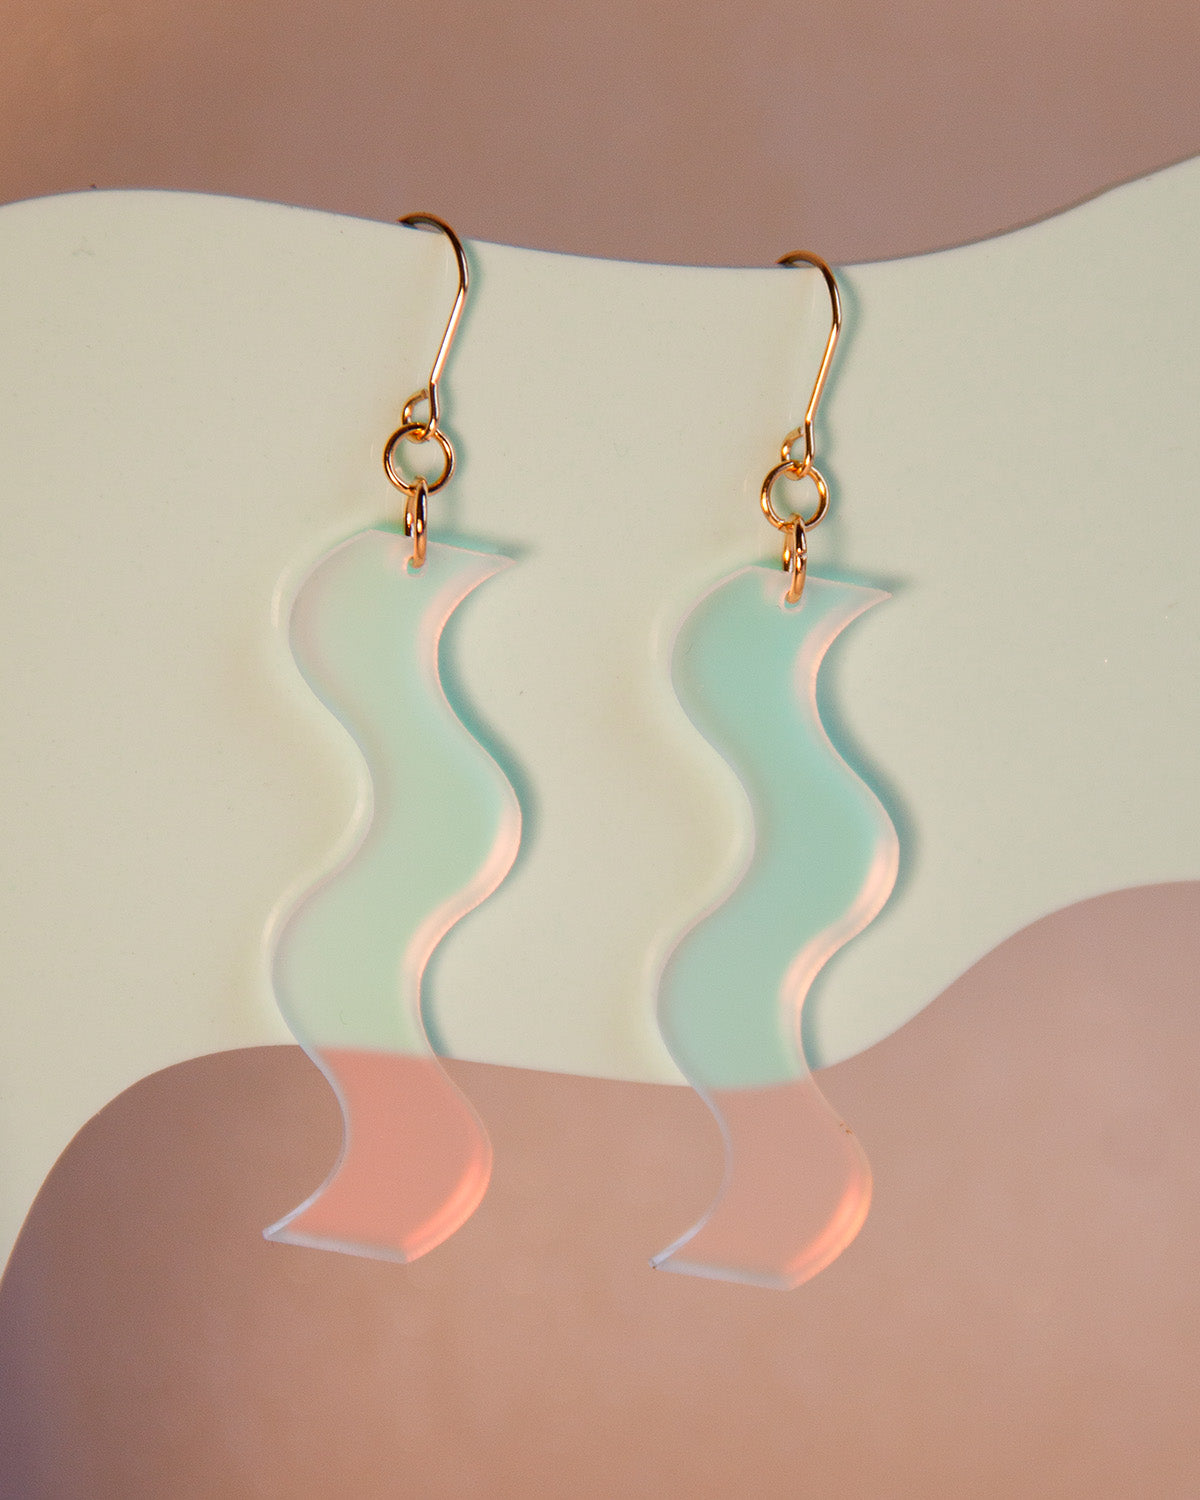 Squiggle earrings in matte iridescent